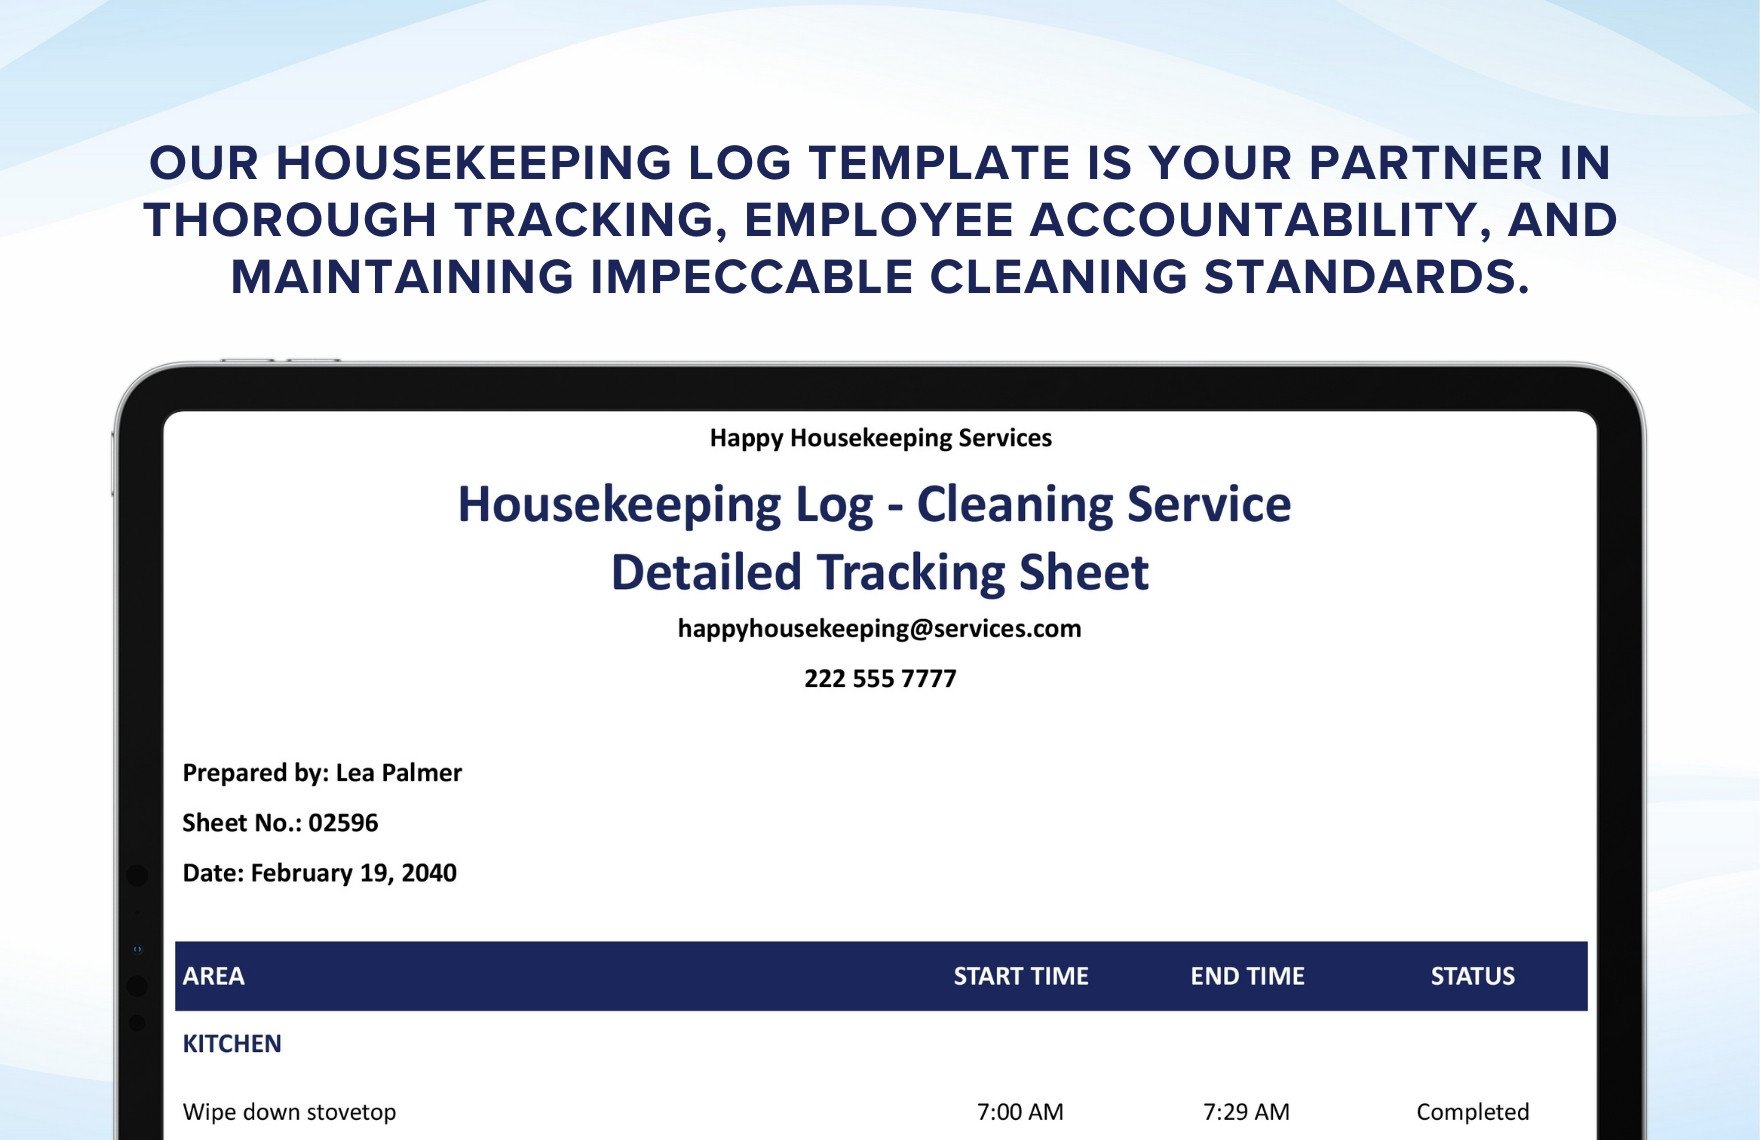 Housekeeping Log - Cleaning Service Detailed Tracking Sheet Template